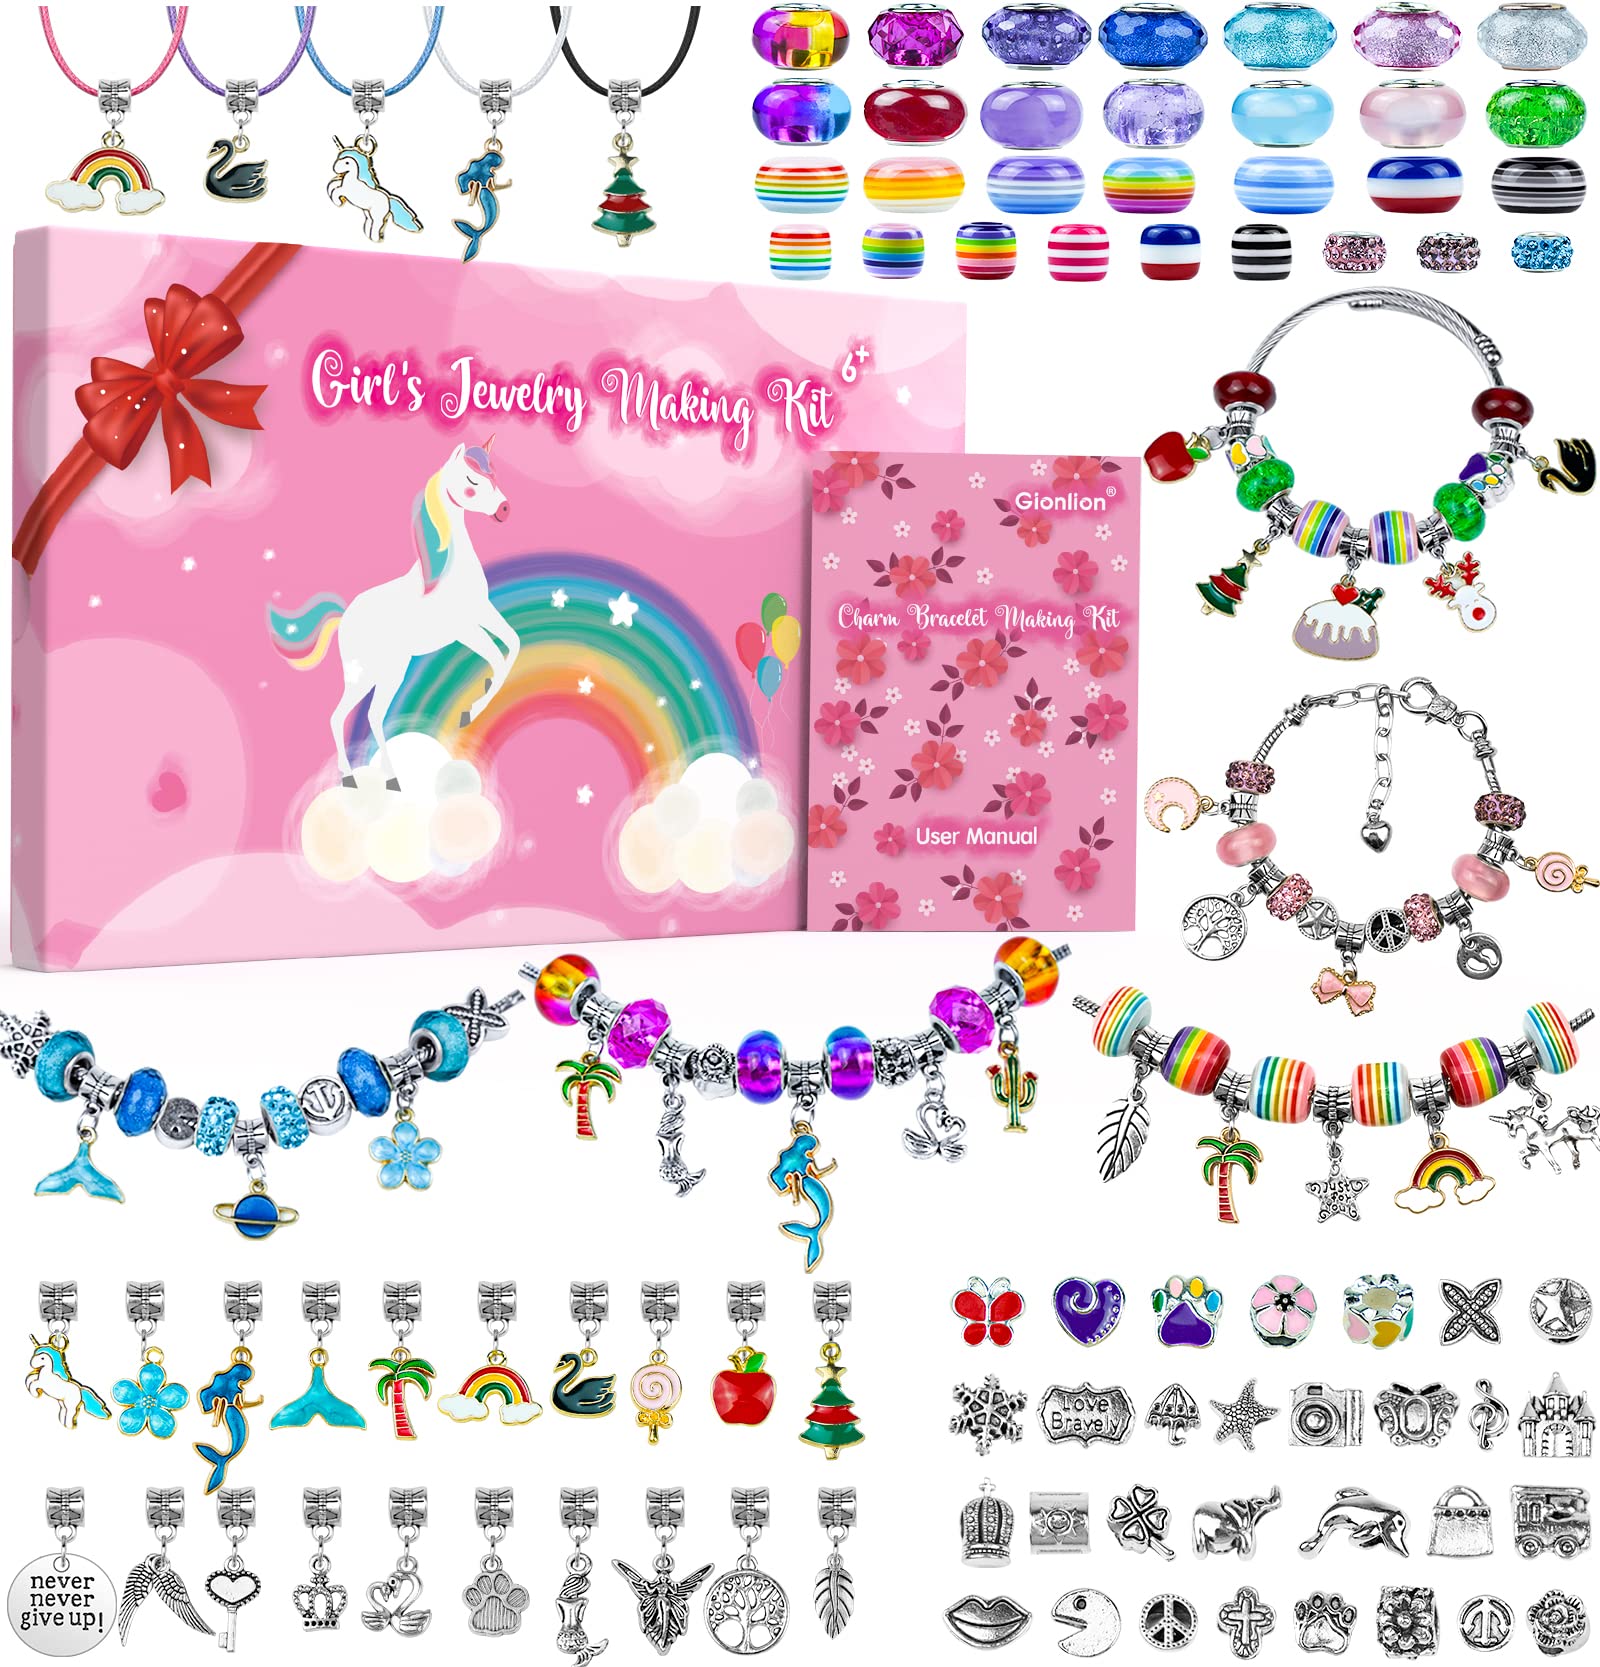 Unicorn Jewelry Making Kit - Crafts for Girls Age France